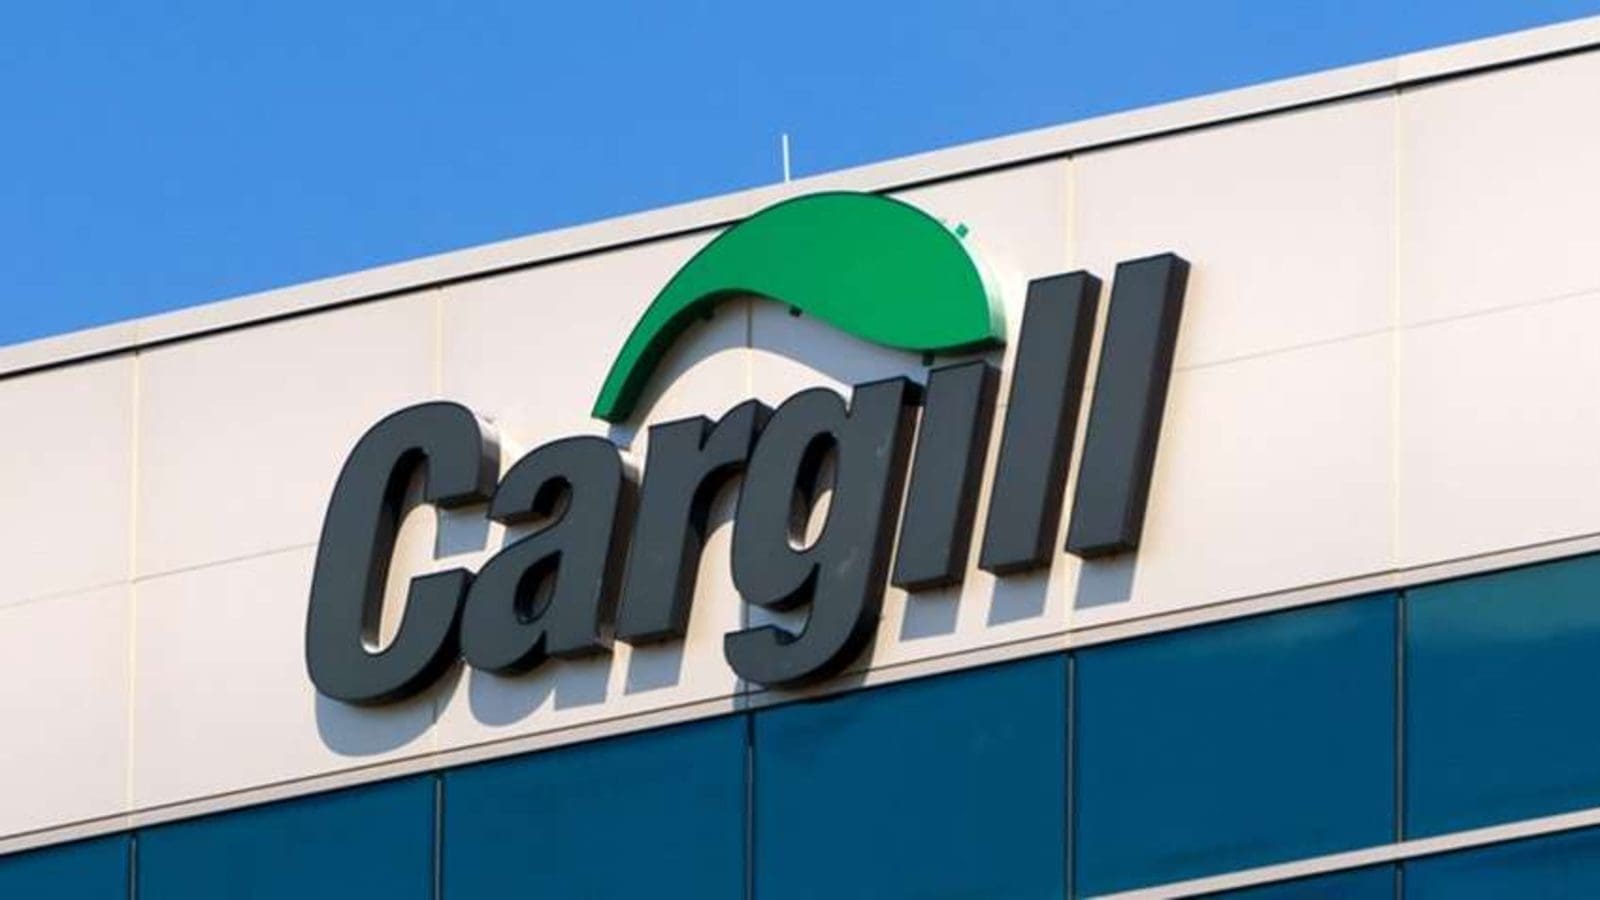 Cargill teams up with Unitec Foods and Fuji Nihon Seito Corp to scale food ingredient solutions in Asia